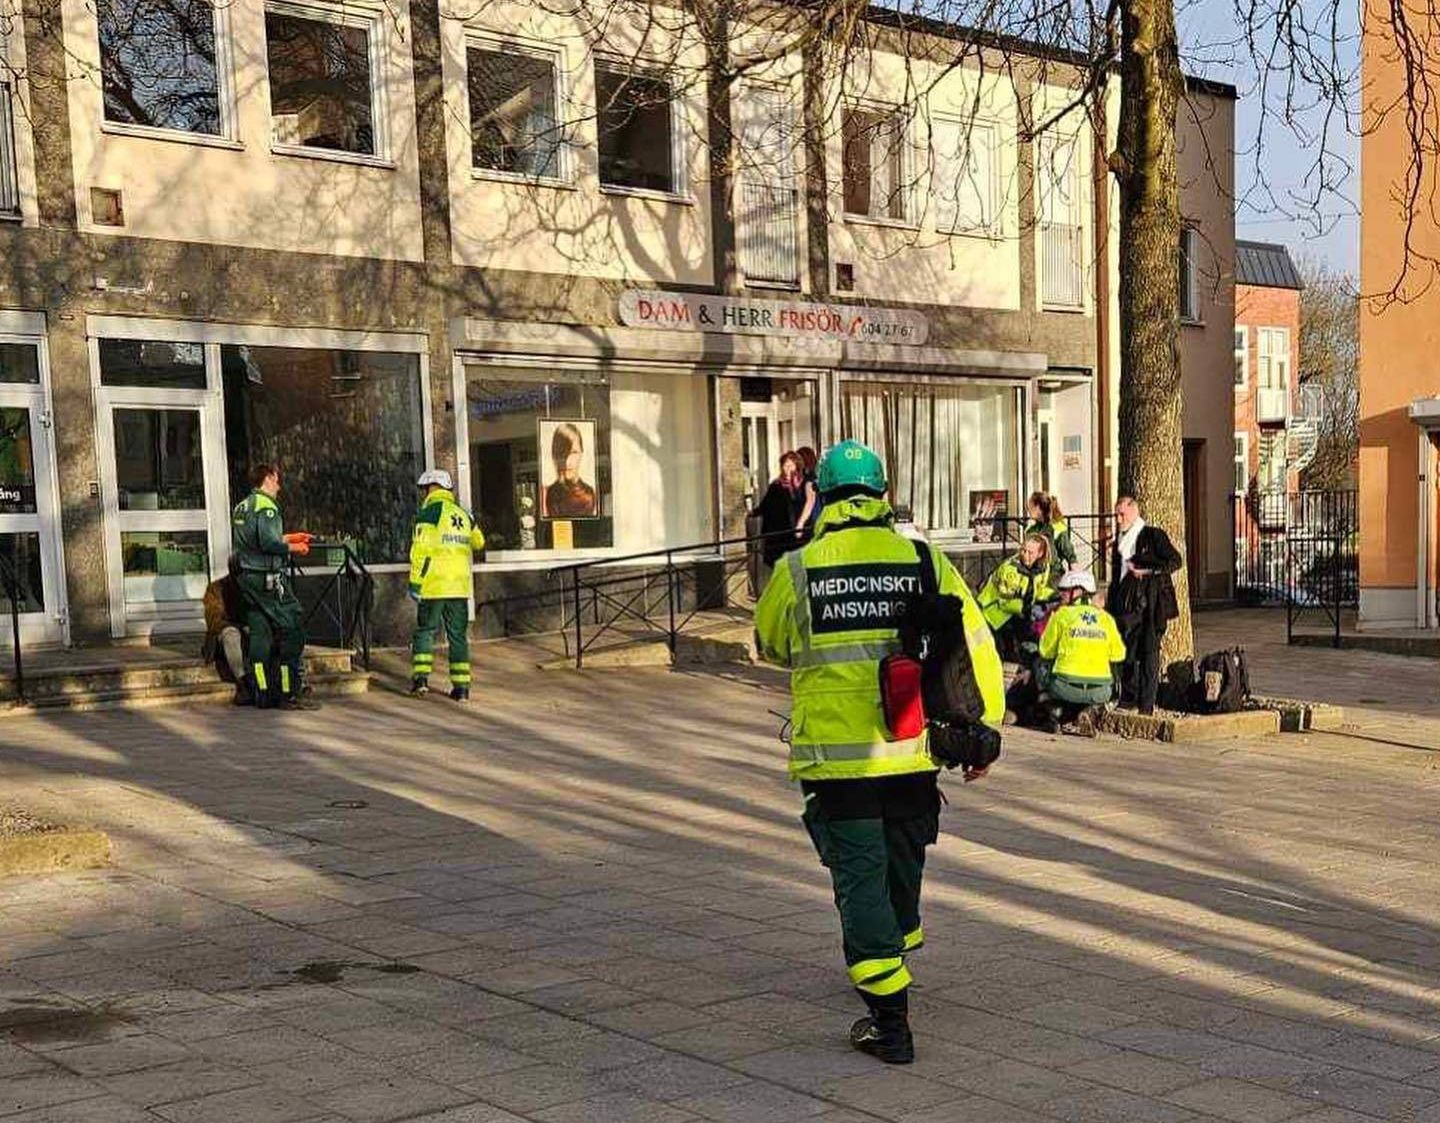 Paramedics on the scene of the Nazi attack. Photo: Left Party Facebook page